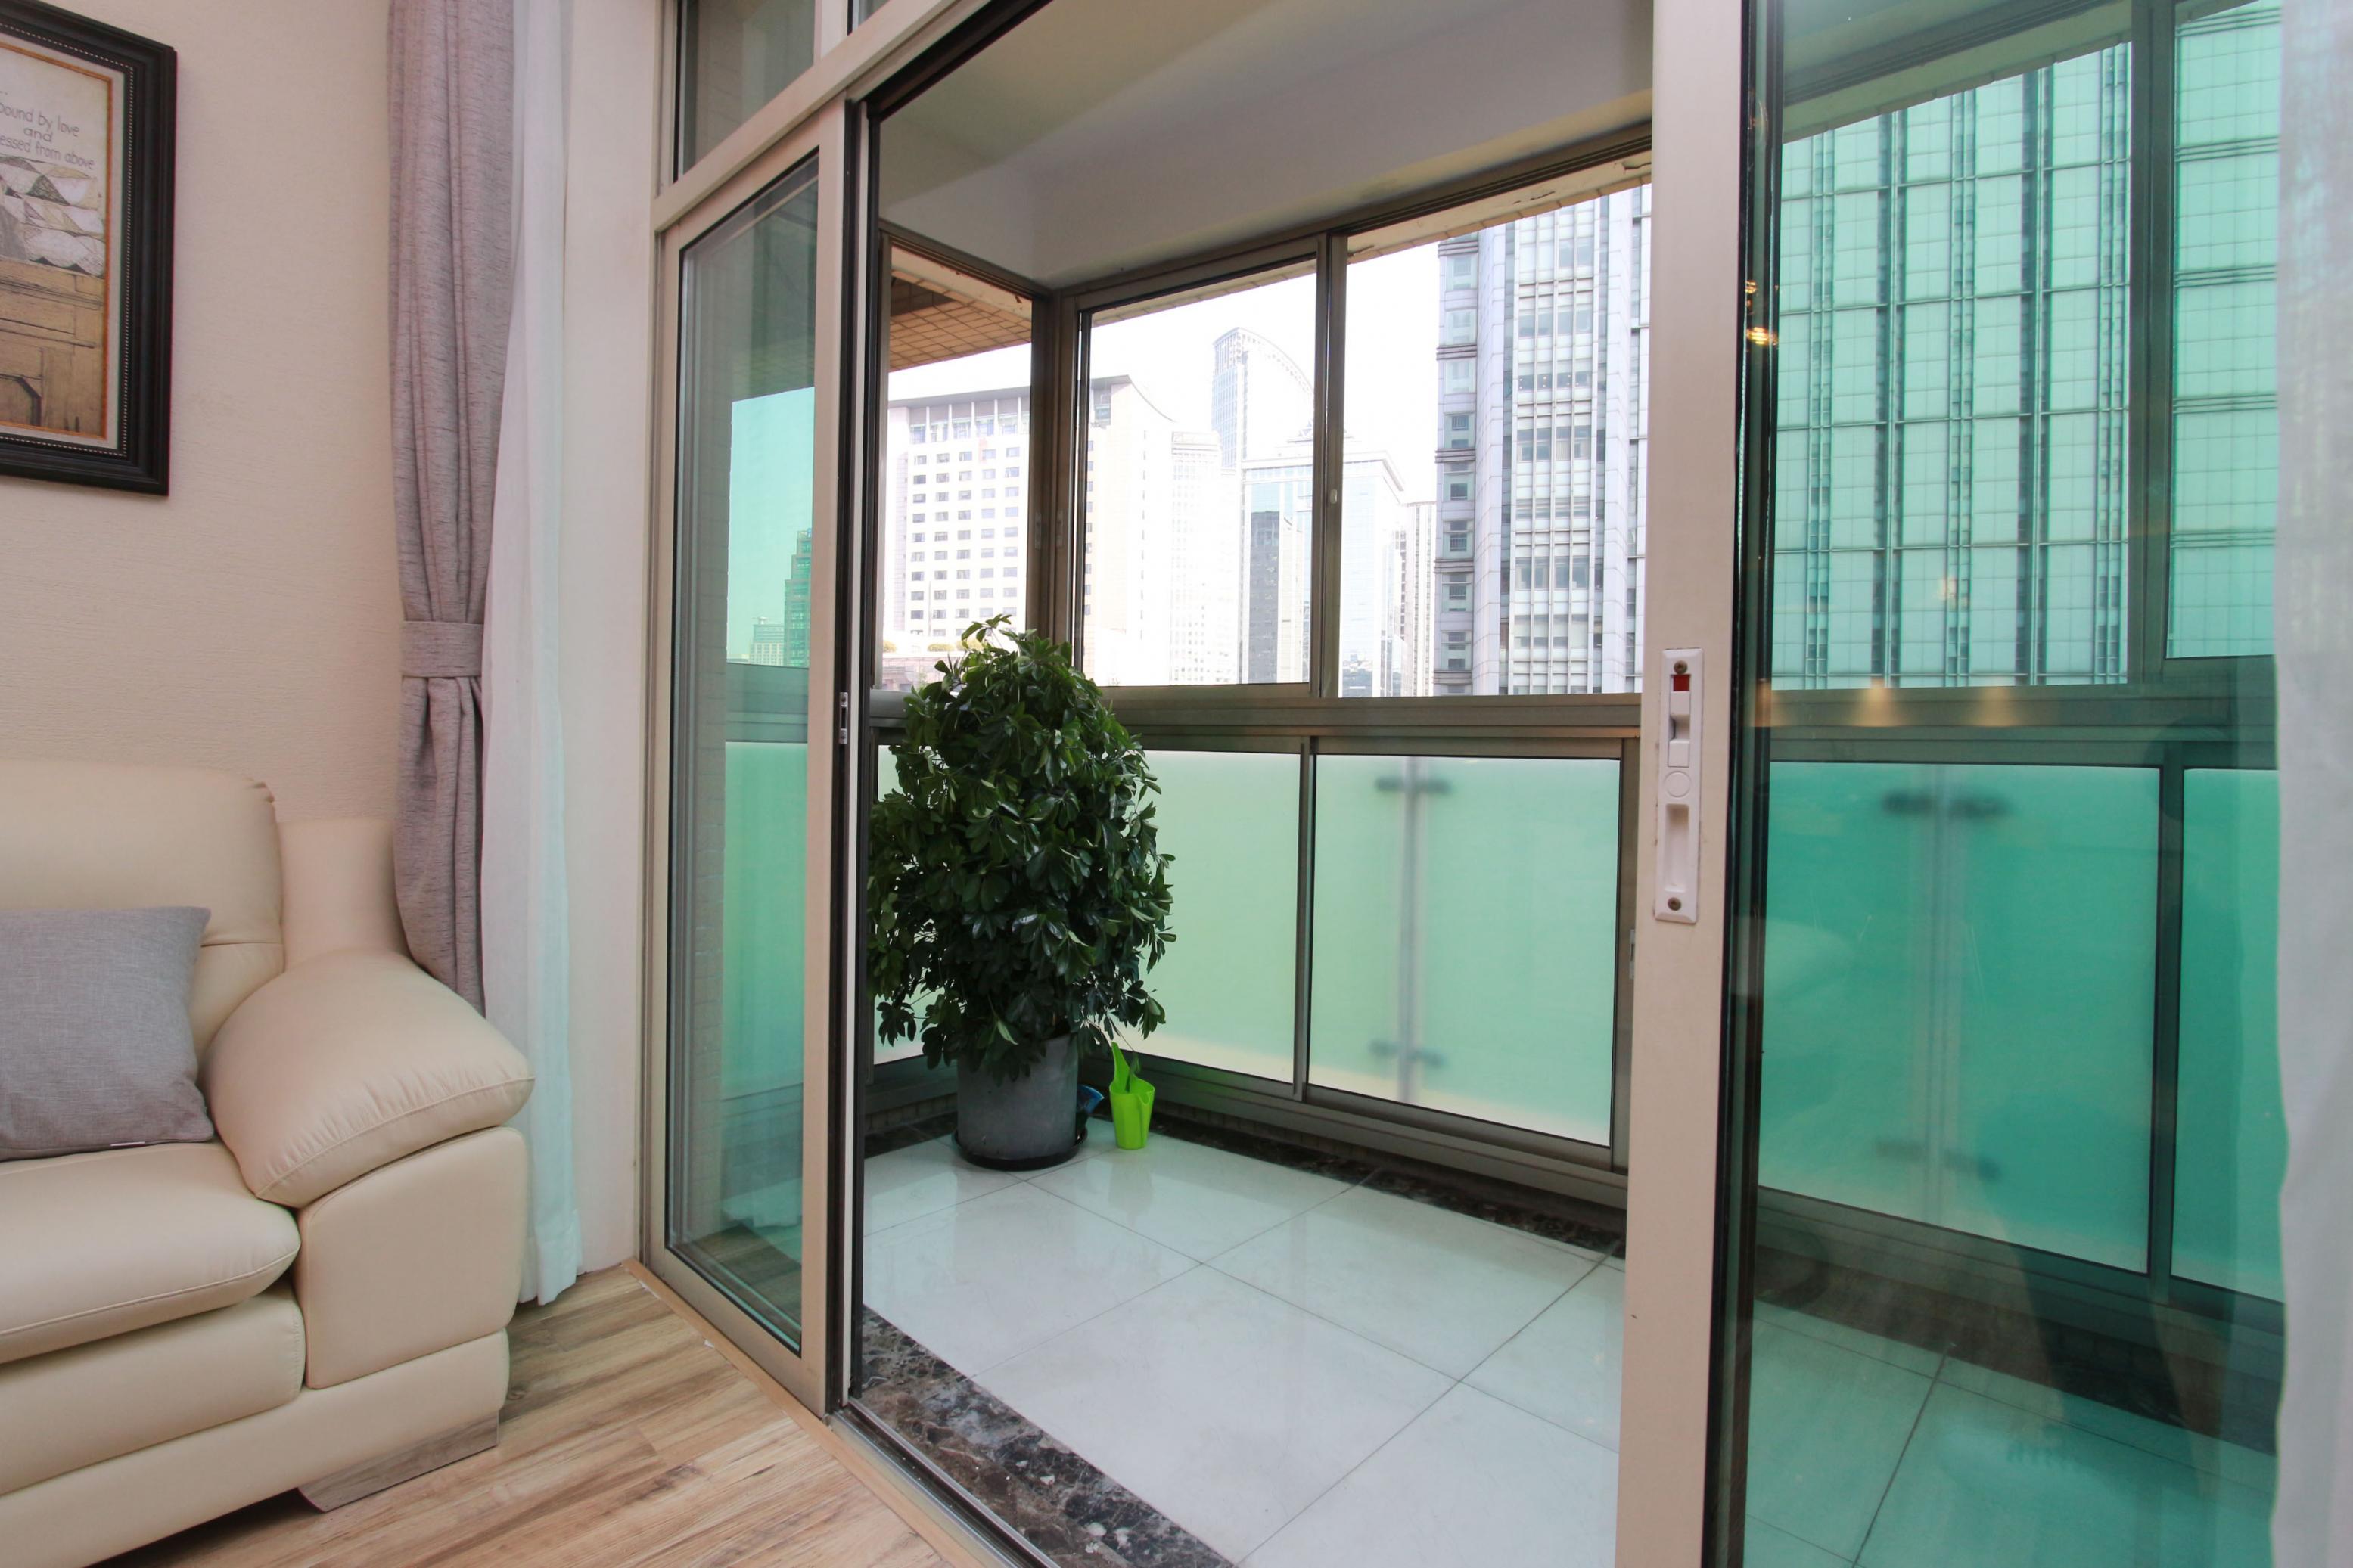 large balcony Renovated Modern High-end Ladoll 1BR Apt LN 2/12/13 for Rent in Shanghai